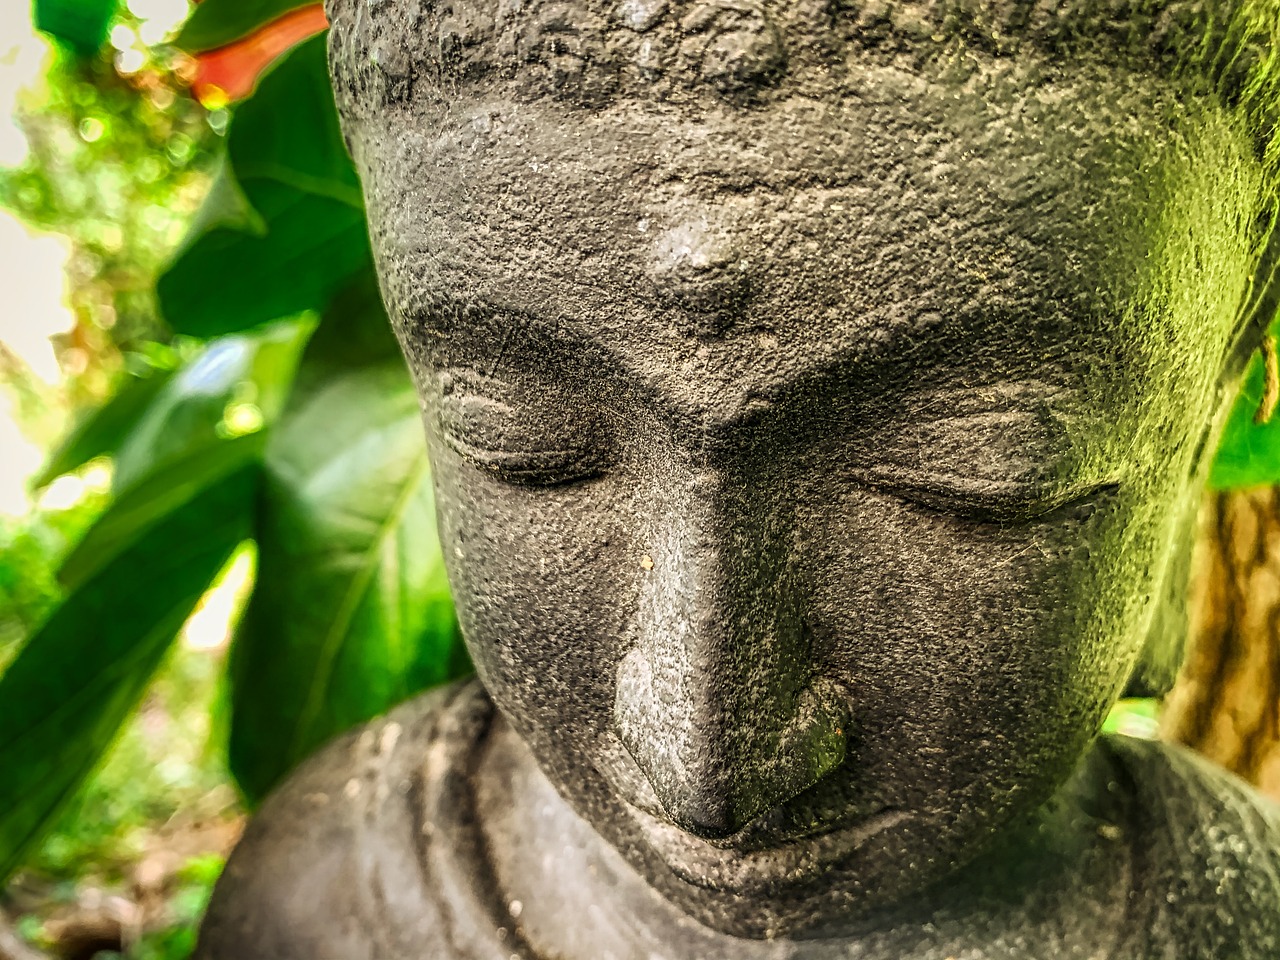 a close up of a statue of a person, a statue, concrete art, zen feeling, lush green, south east asian with round face, vibrant setting